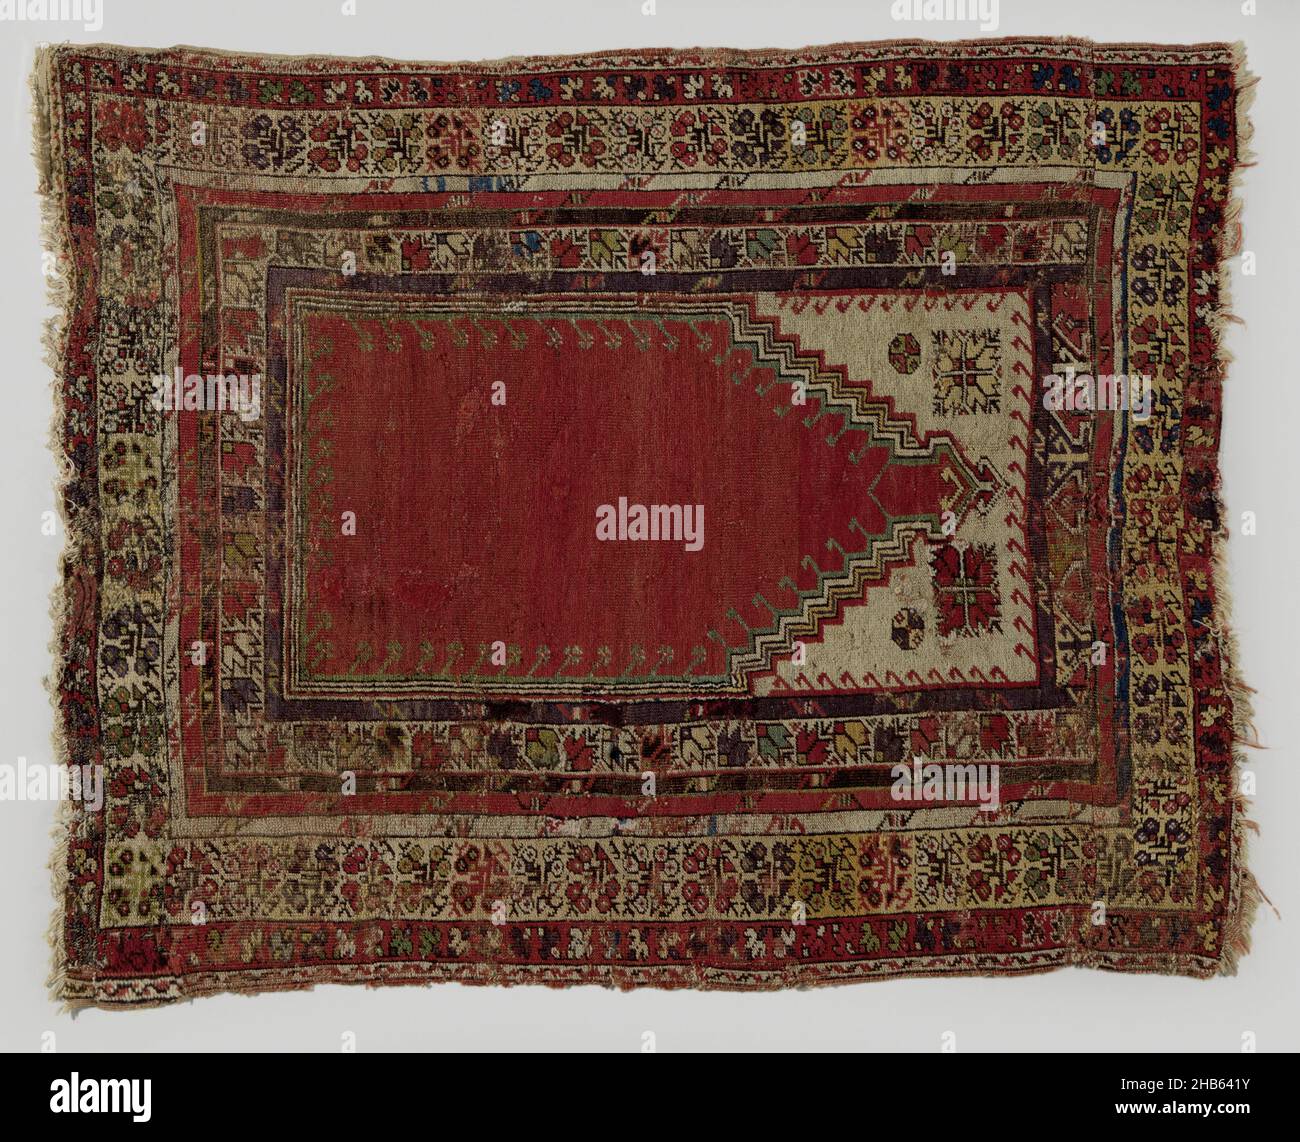 Prayer rug, Prayer rug, stepped mirab on red fond, yellow and red borders., maker: anonymous, Centraal-Klein-Azië, 1800 - 1900, wool, height 158 cm × width 125 cm Stock Photo